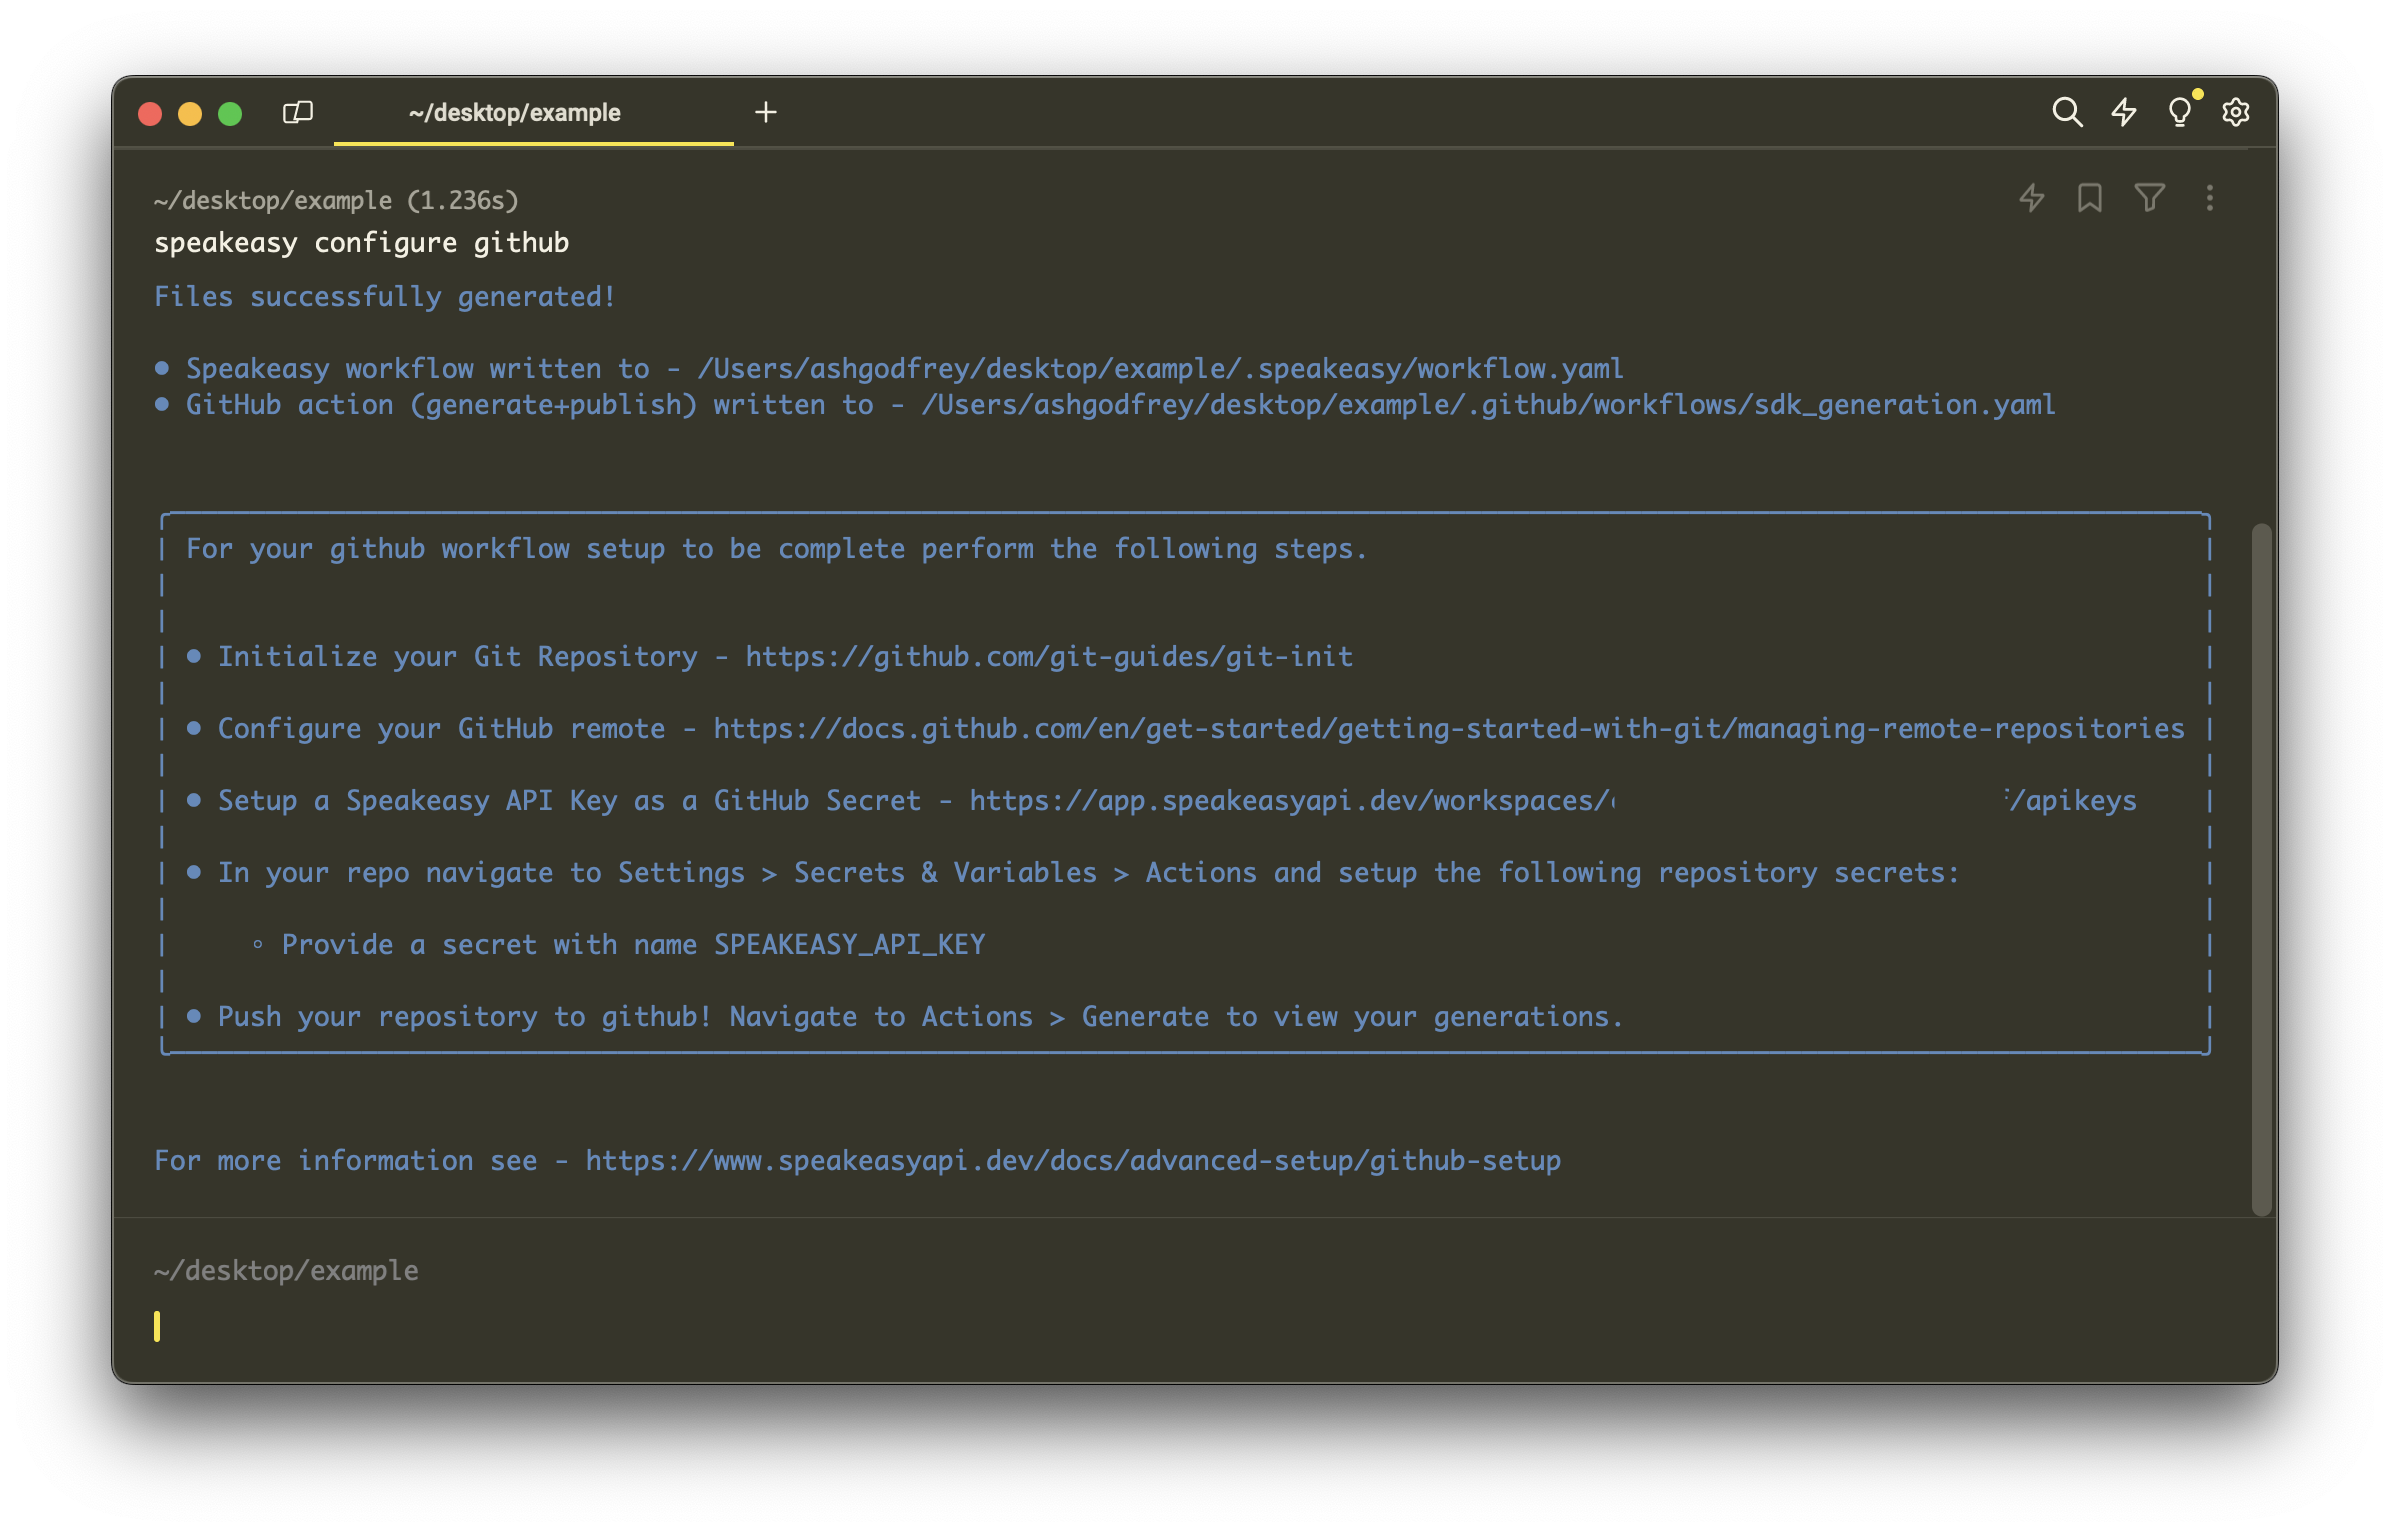 Screenshot of the terminal after successfully running Speakeasy configure Github.